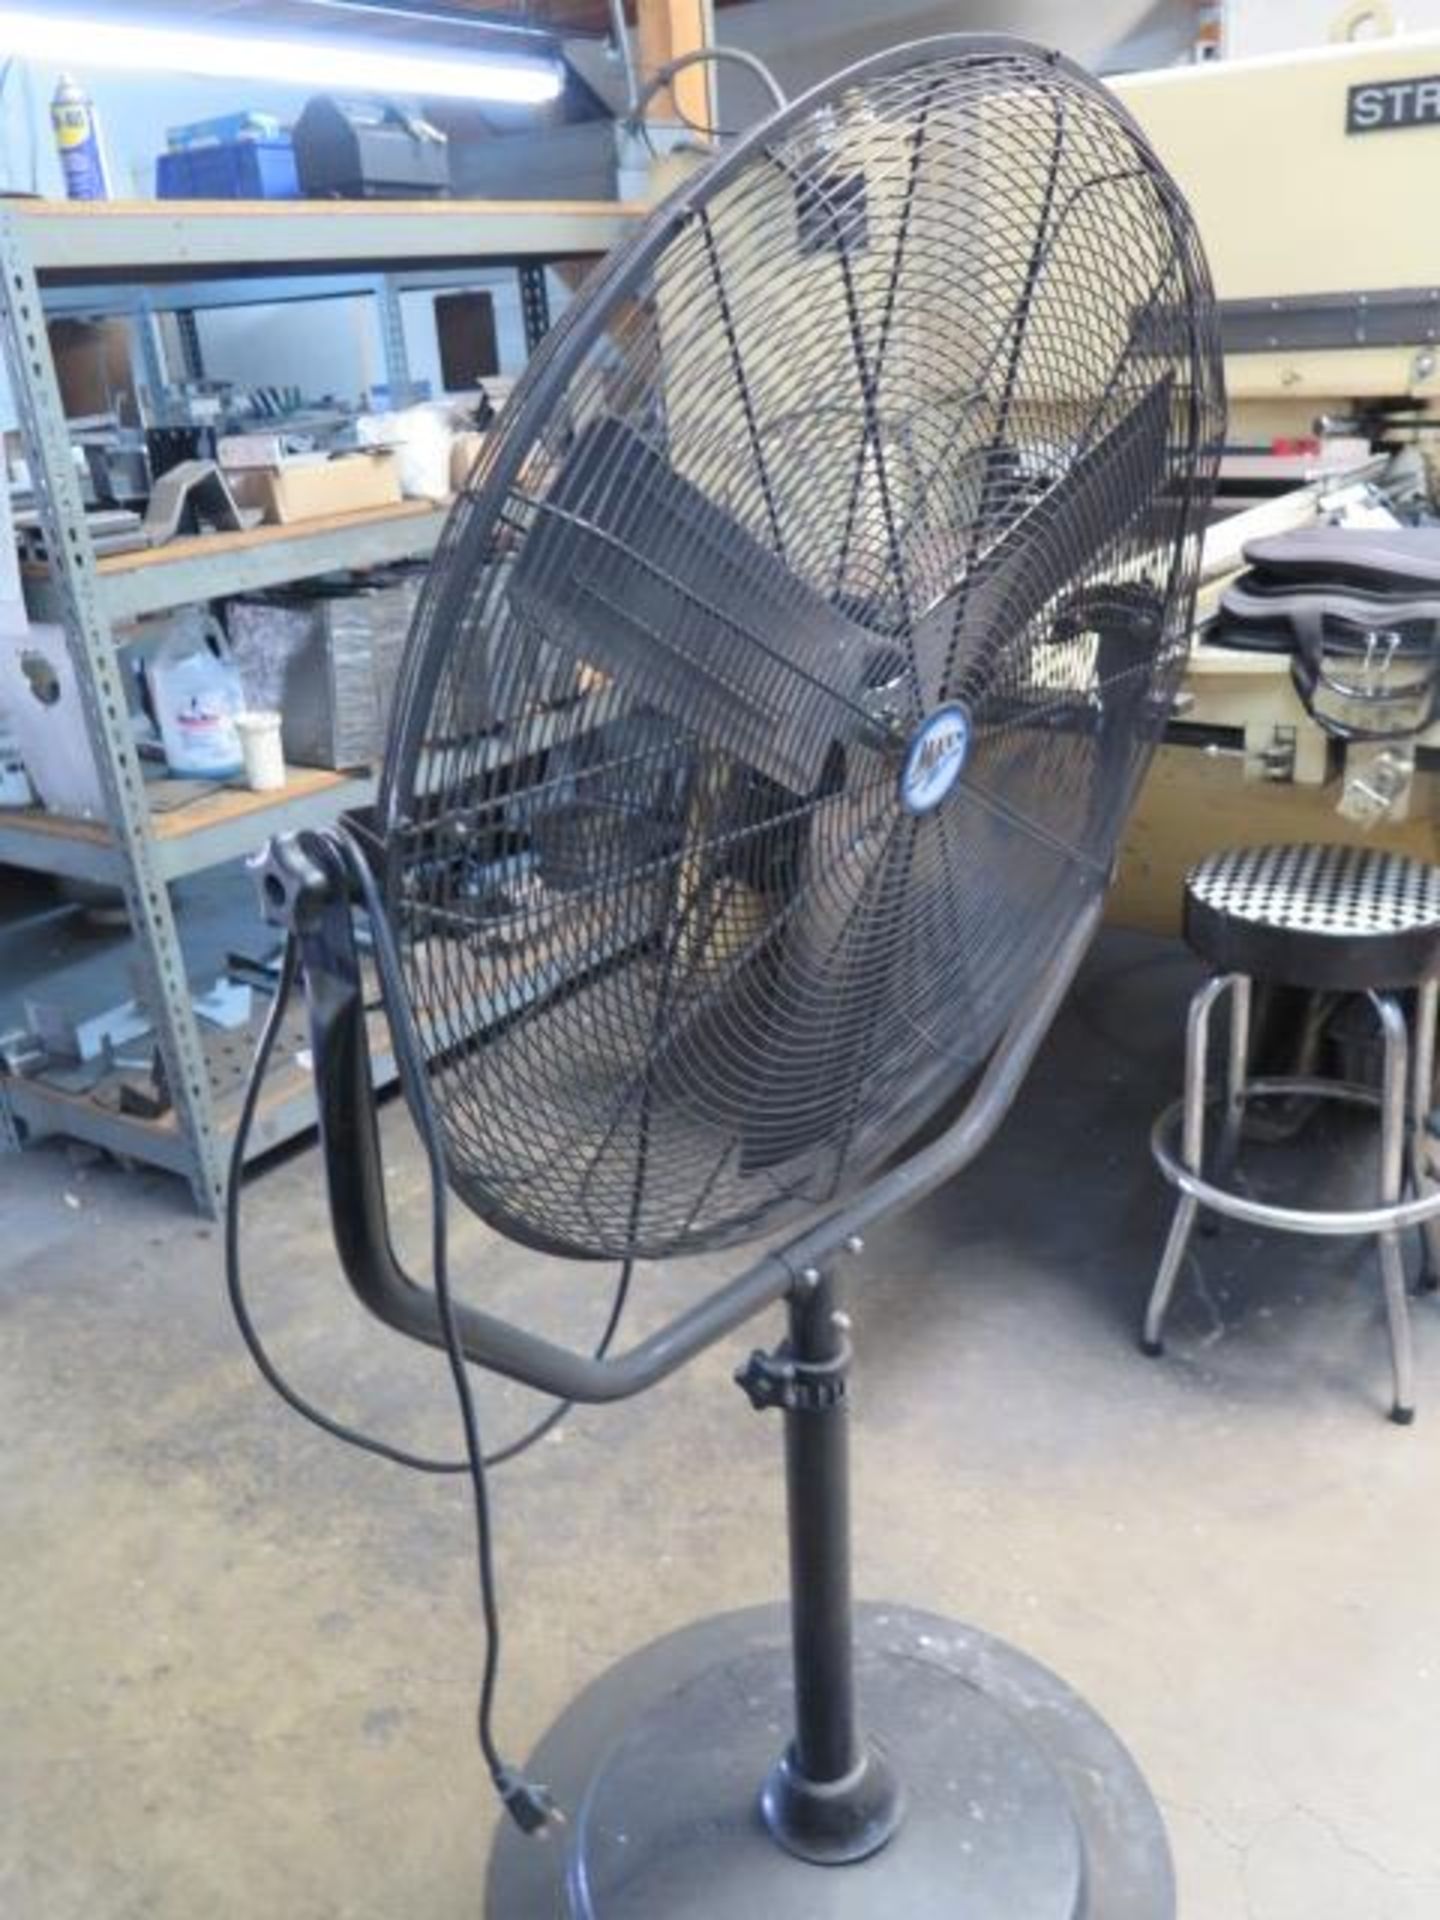 Shop Fans (2) (SOLD AS-IS - NO WARRANTY) - Image 5 of 8